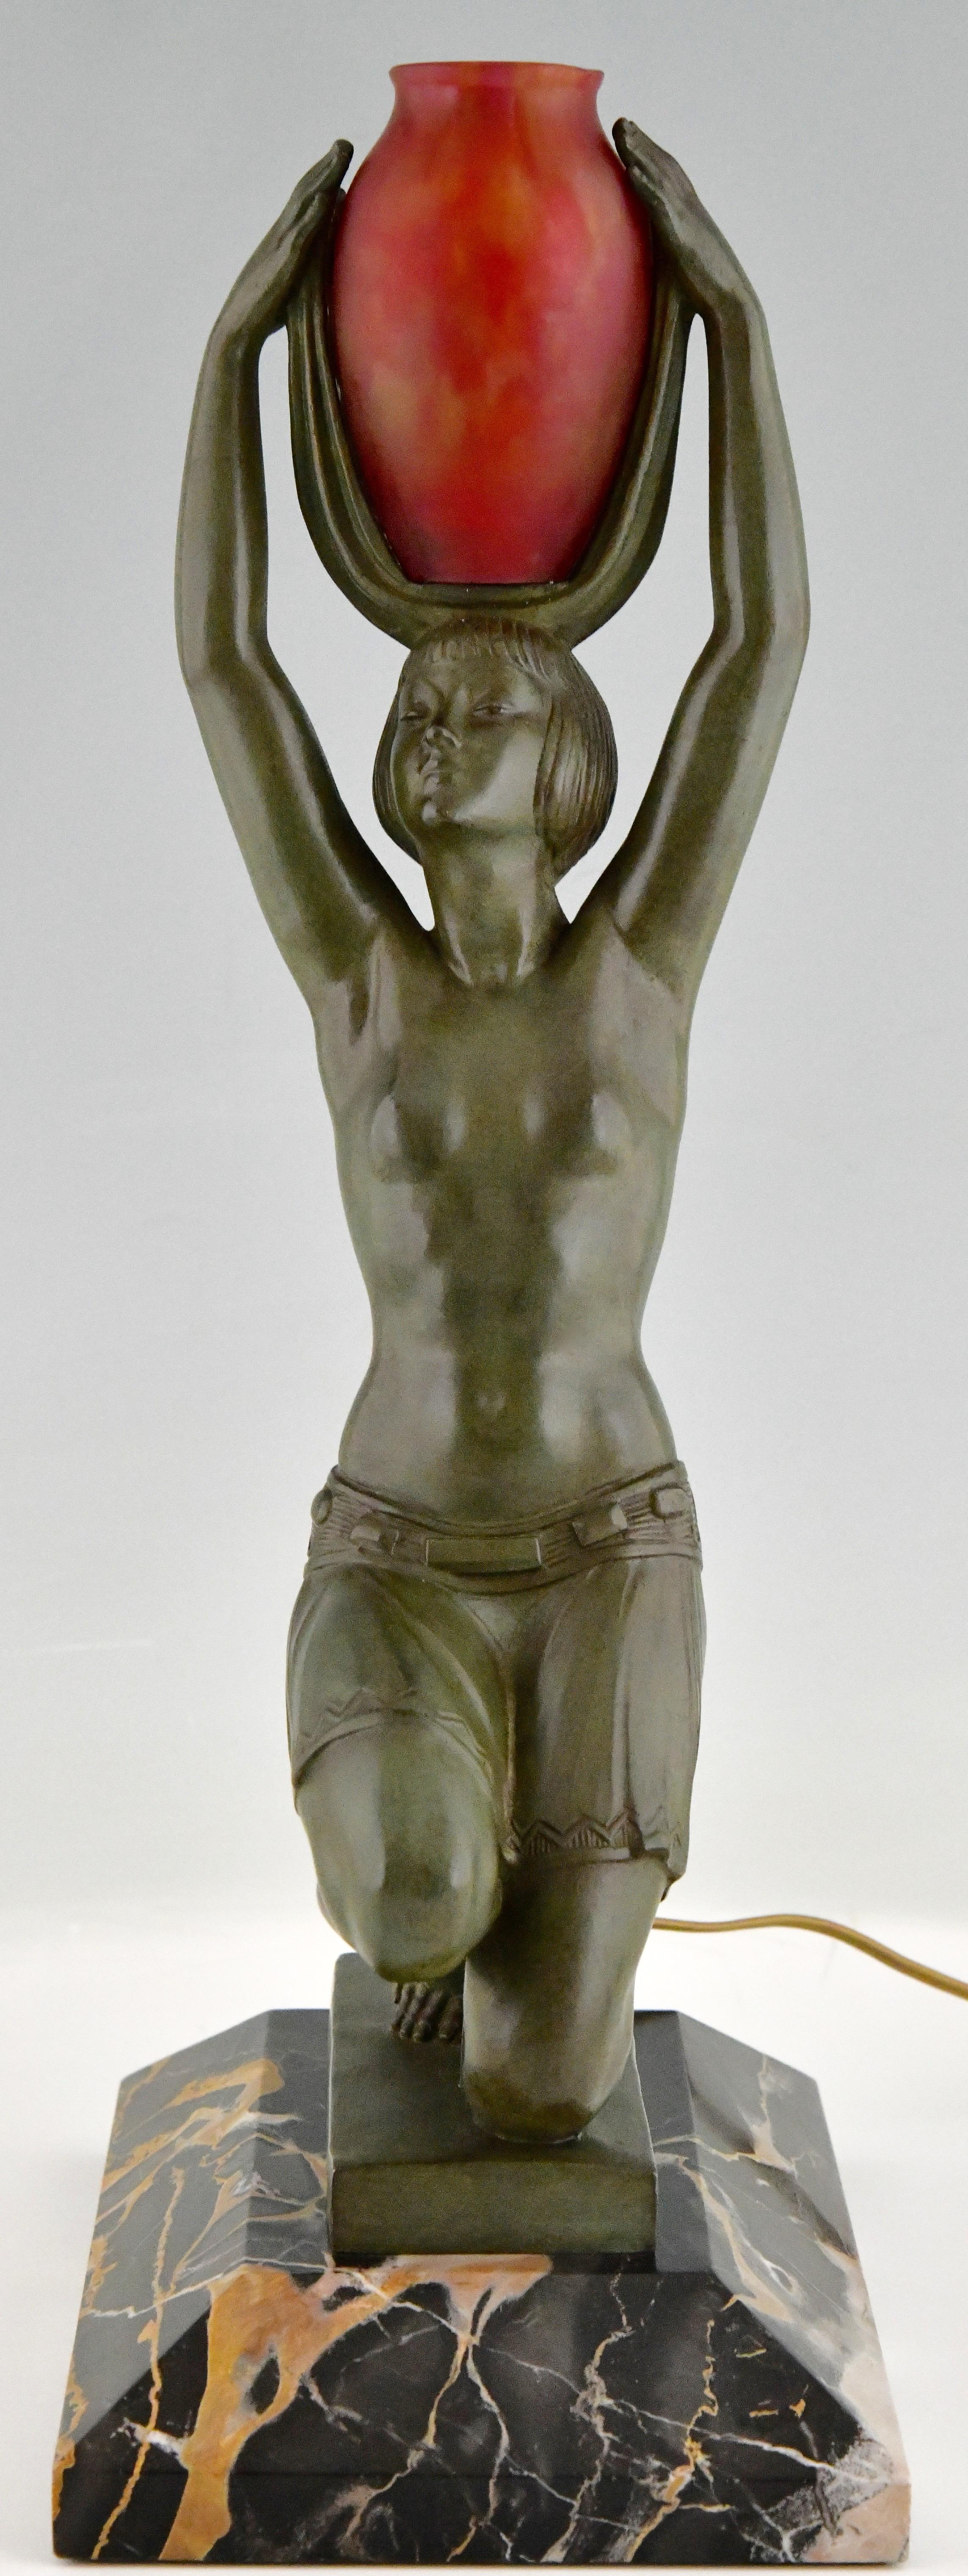 Art Deco Lamp Nude with Vase by Fayral P. Le Faguays Daum Vers L'oasis 1930 For Sale 3